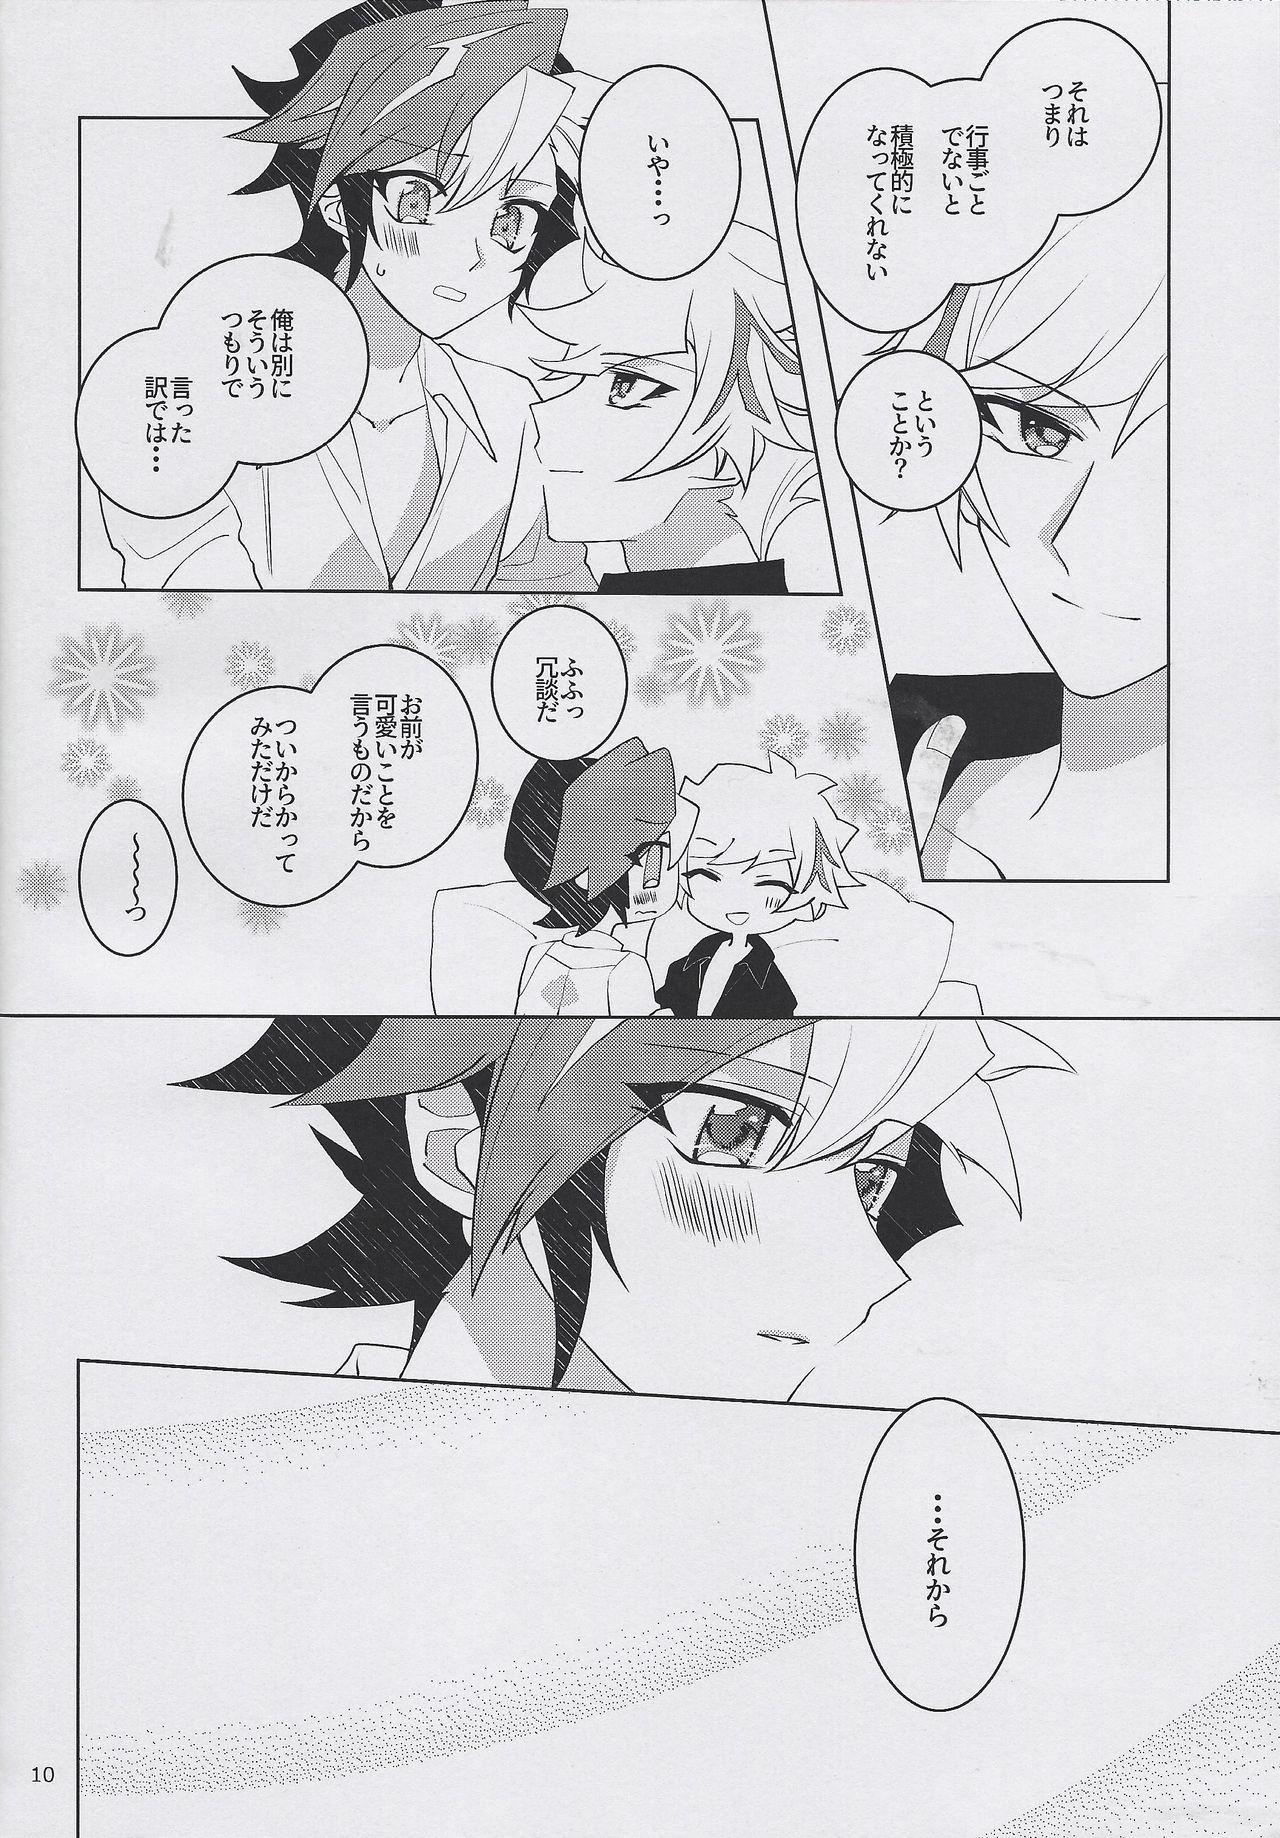 Hot Cunt Unmei no Melty Choco - Yu gi oh vrains Nudity - Page 9